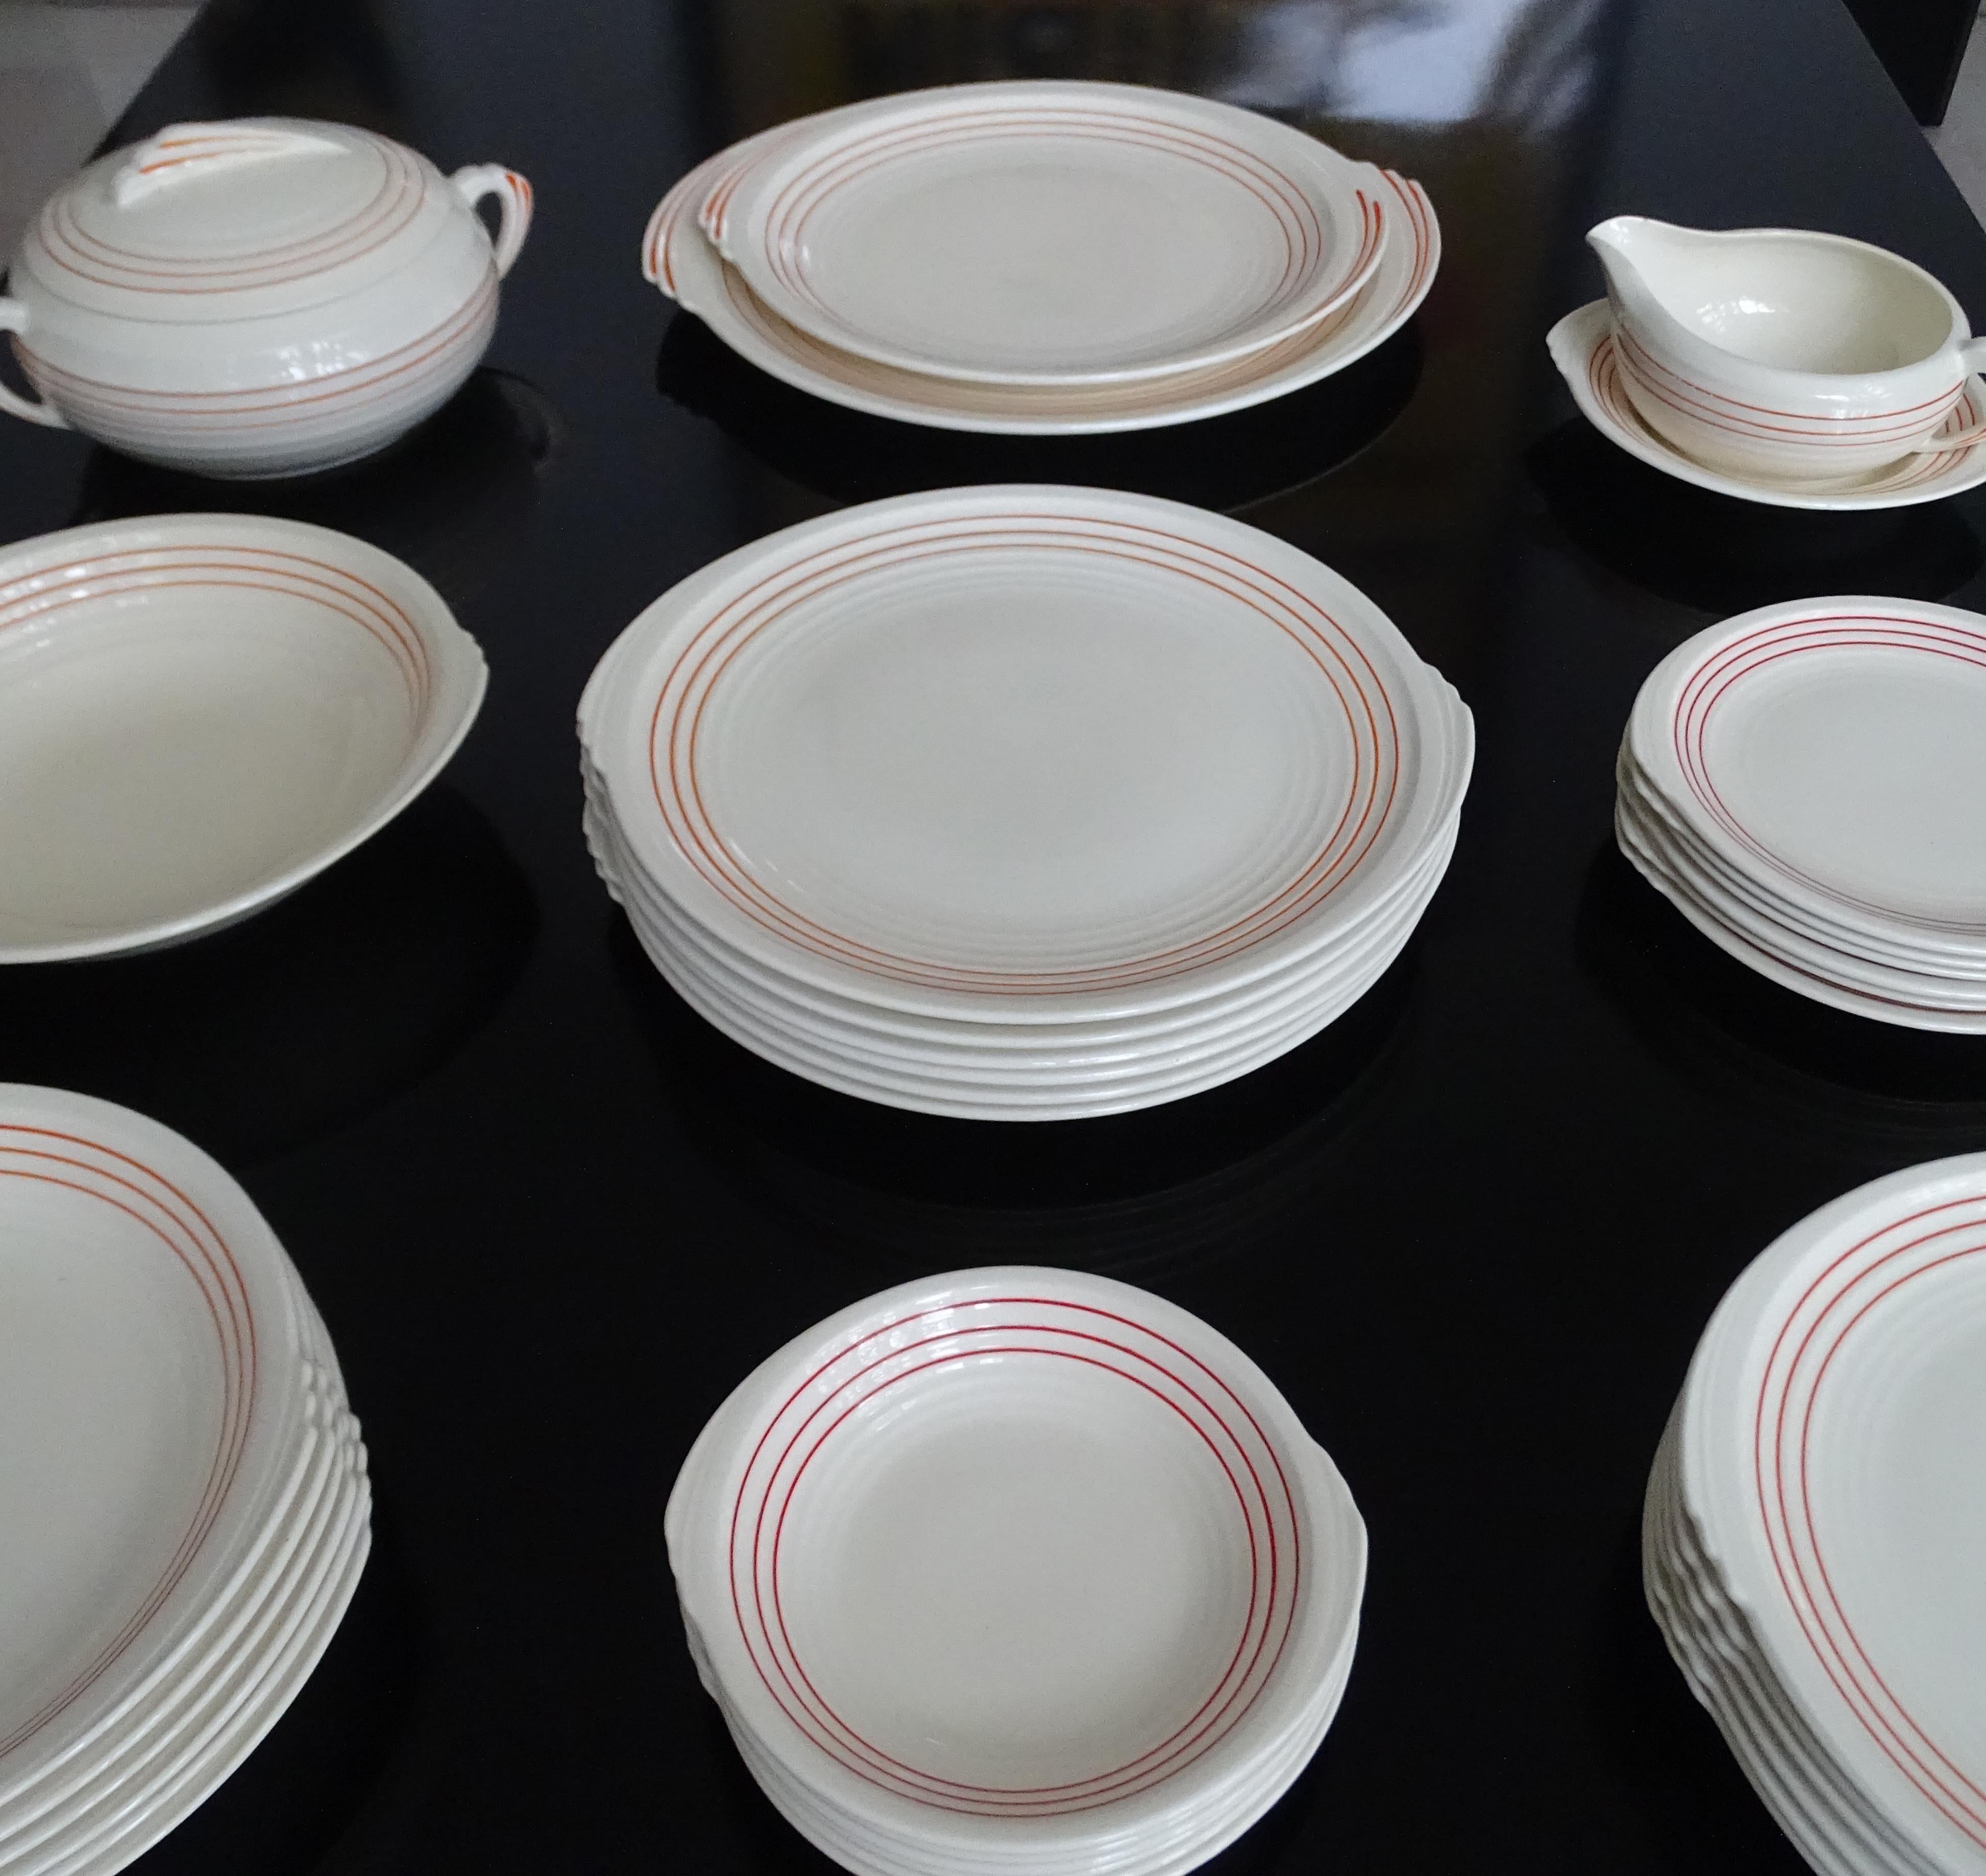 Extremely rare Art Deco modernist porcelain china dining tableware set manufactured by Edwin Knowles during the 1930s, this set was the first introduced in 1936 with a typical Art Deco streamlined design, which is especially remarkable with the